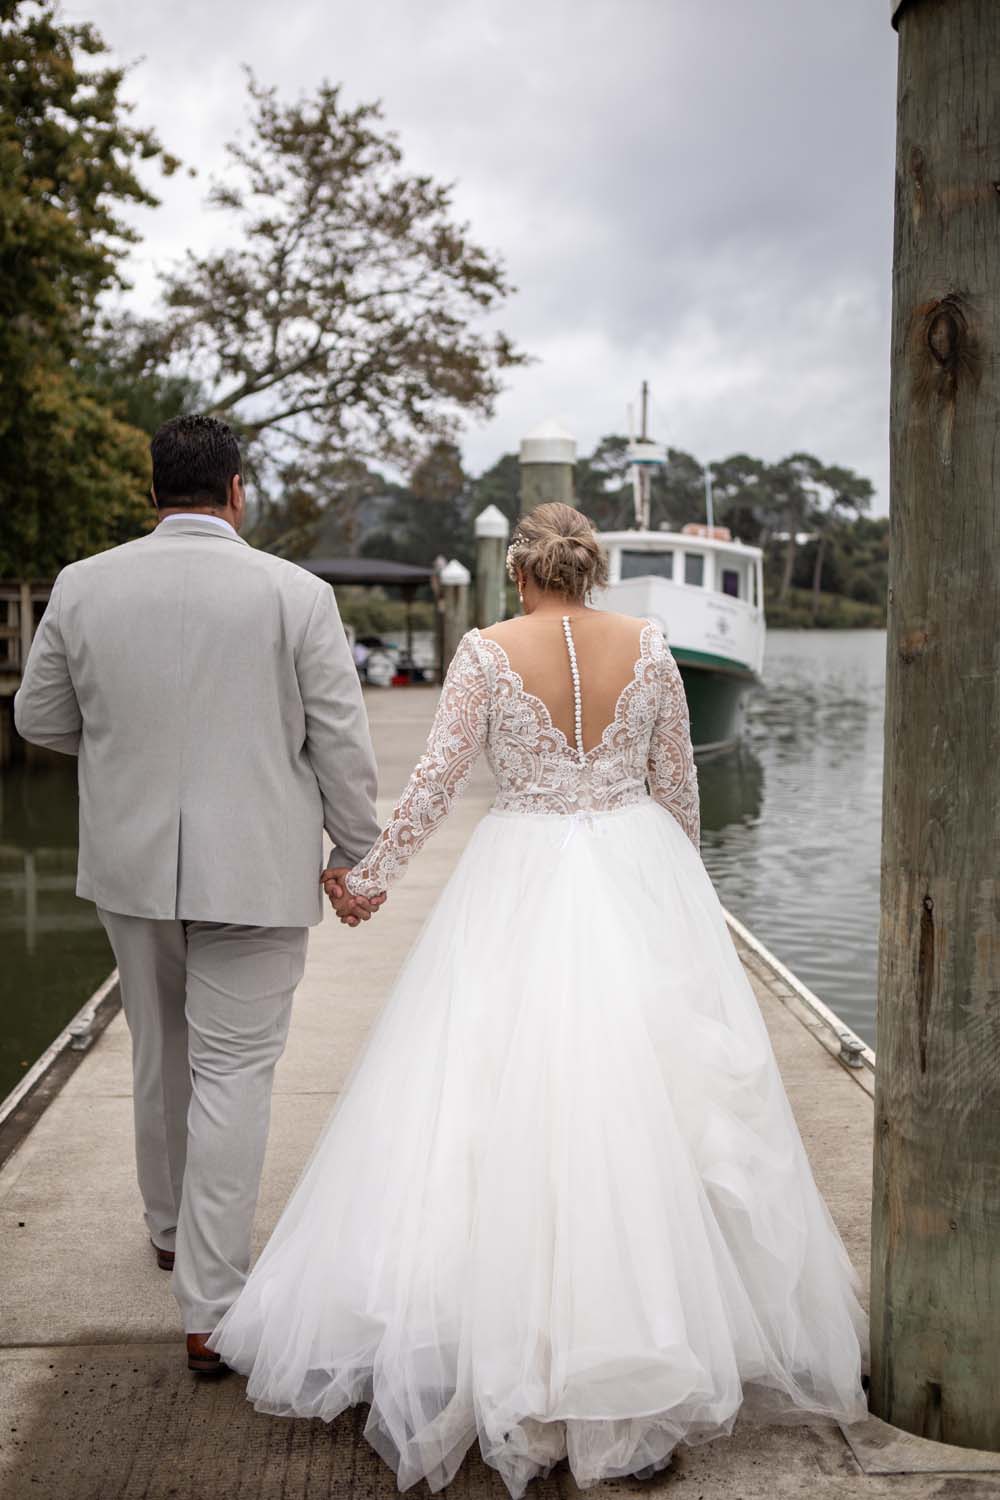 Heartwarming Wedding at The Boat House